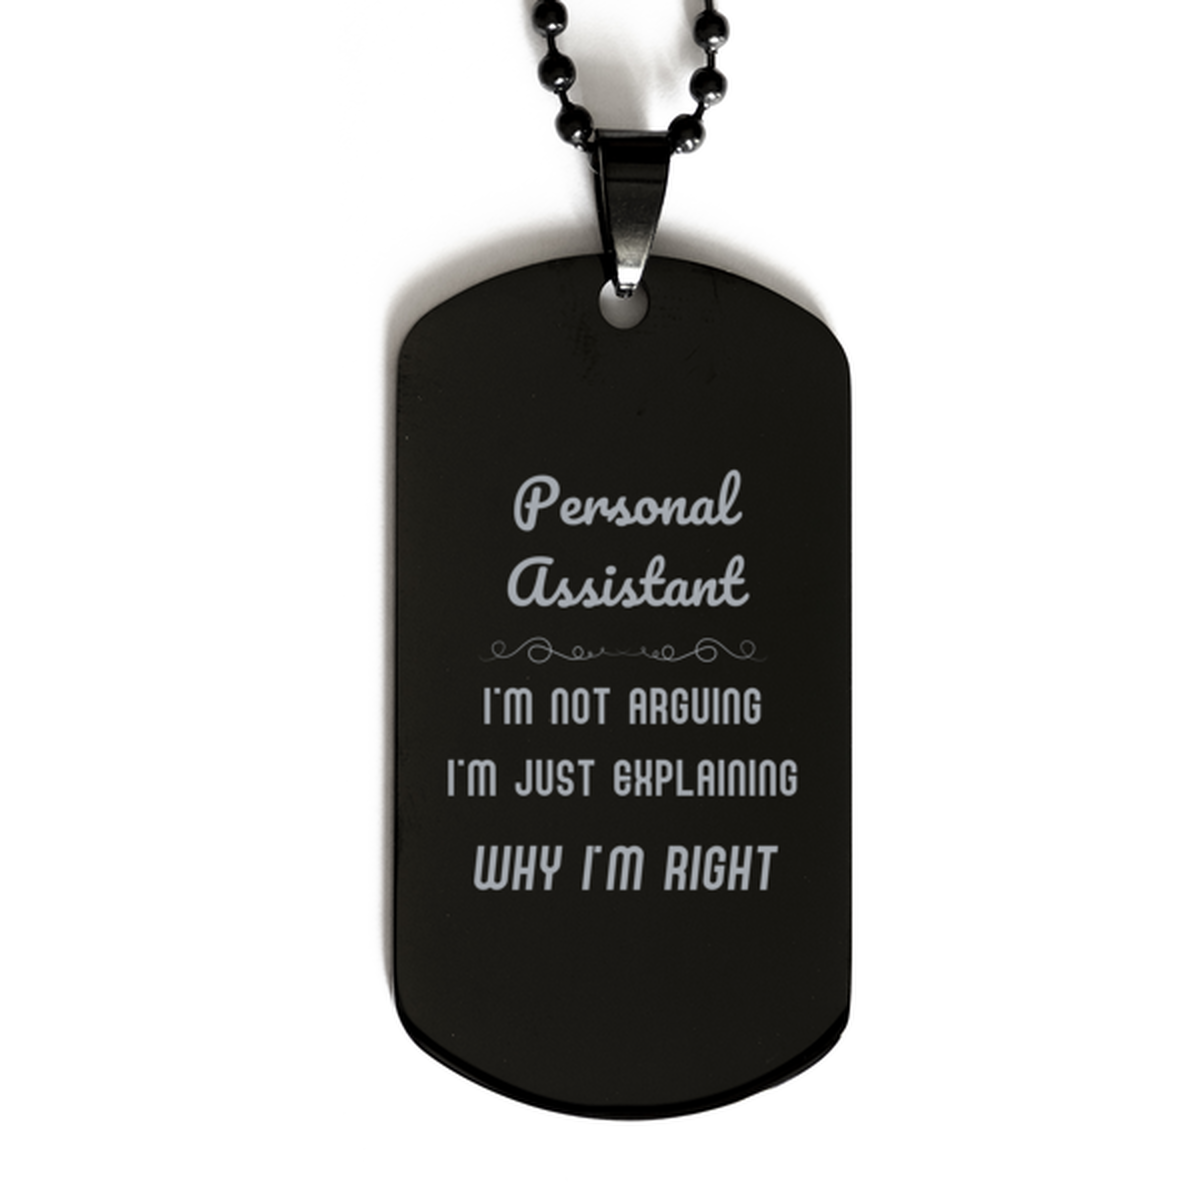 Personal Assistant I'm not Arguing. I'm Just Explaining Why I'm RIGHT Black Dog Tag, Funny Saying Quote Personal Assistant Gifts For Personal Assistant Graduation Birthday Christmas Gifts for Men Women Coworker